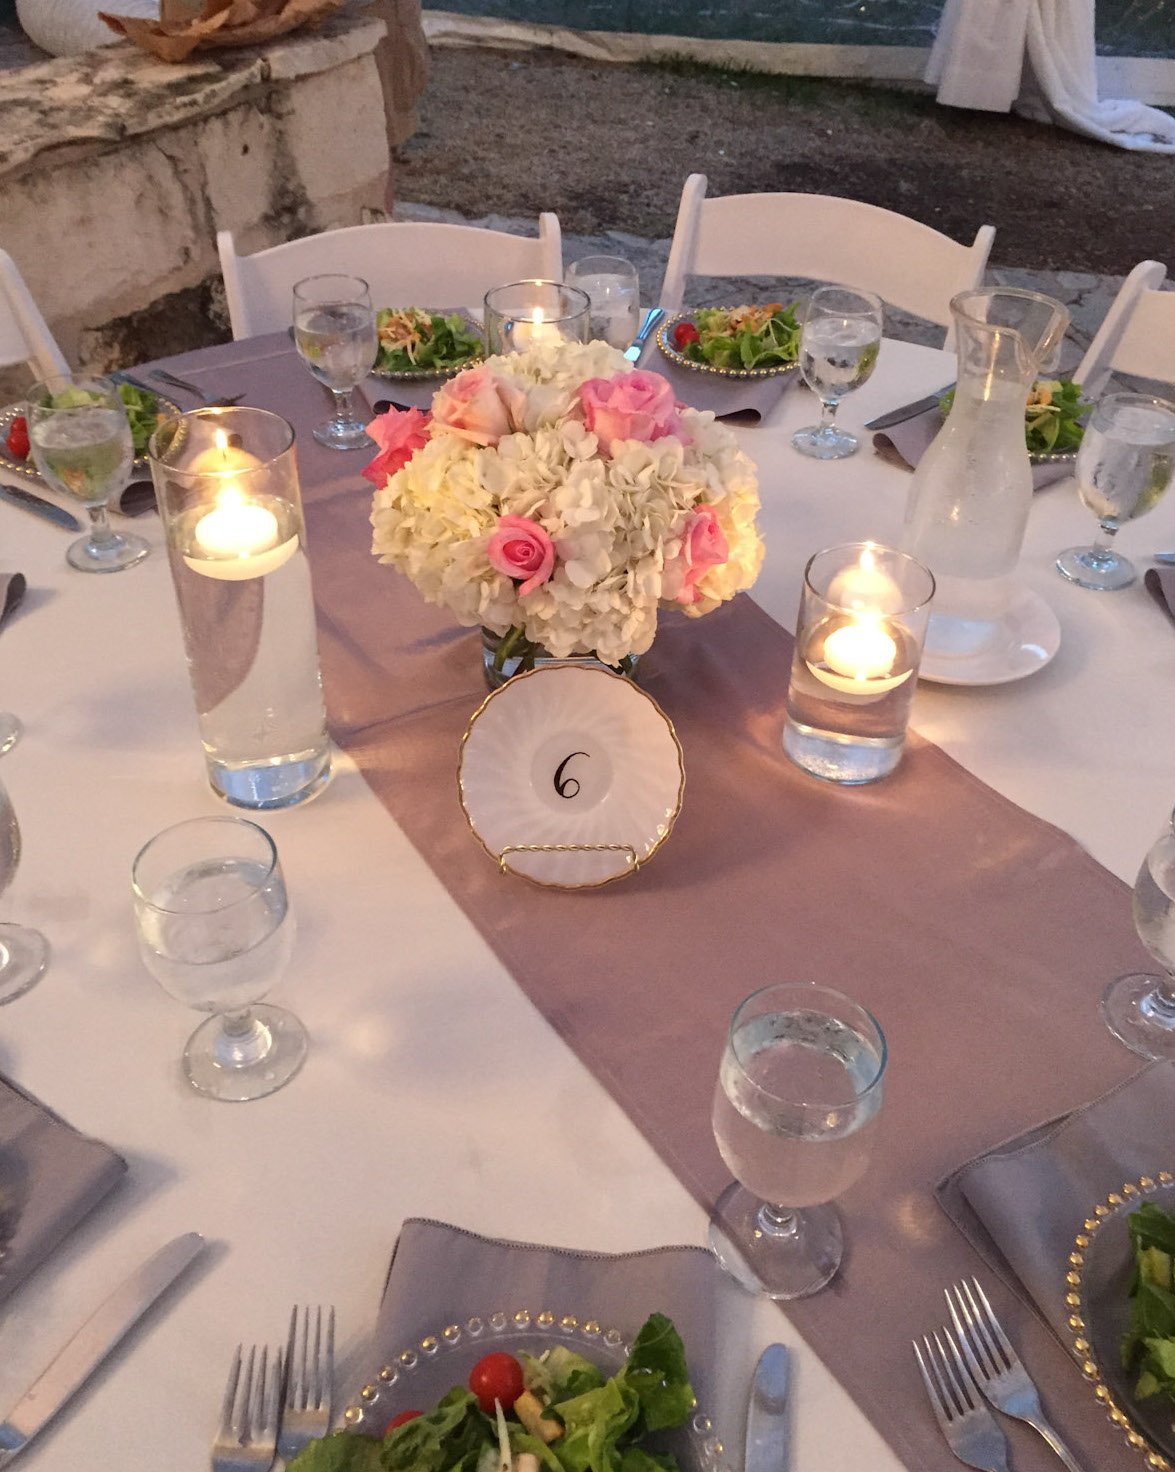 A table at a wedding decorated with a flower arrangement centerpiece